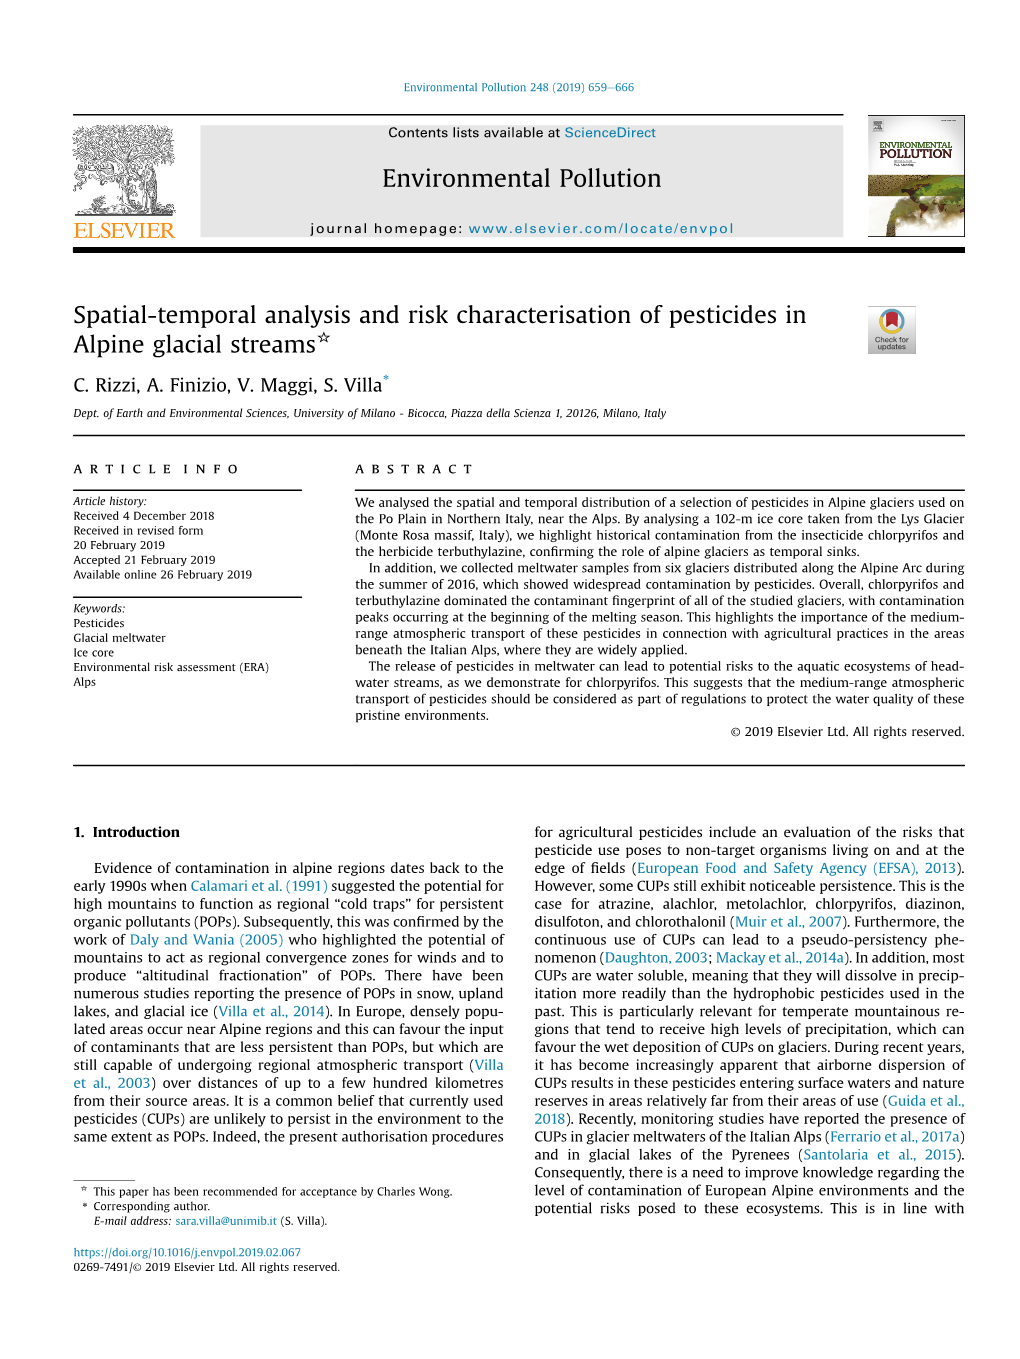 Spatial-Temporal Analysis and Risk Characterisation of Pesticides in Alpine Glacial Streams*